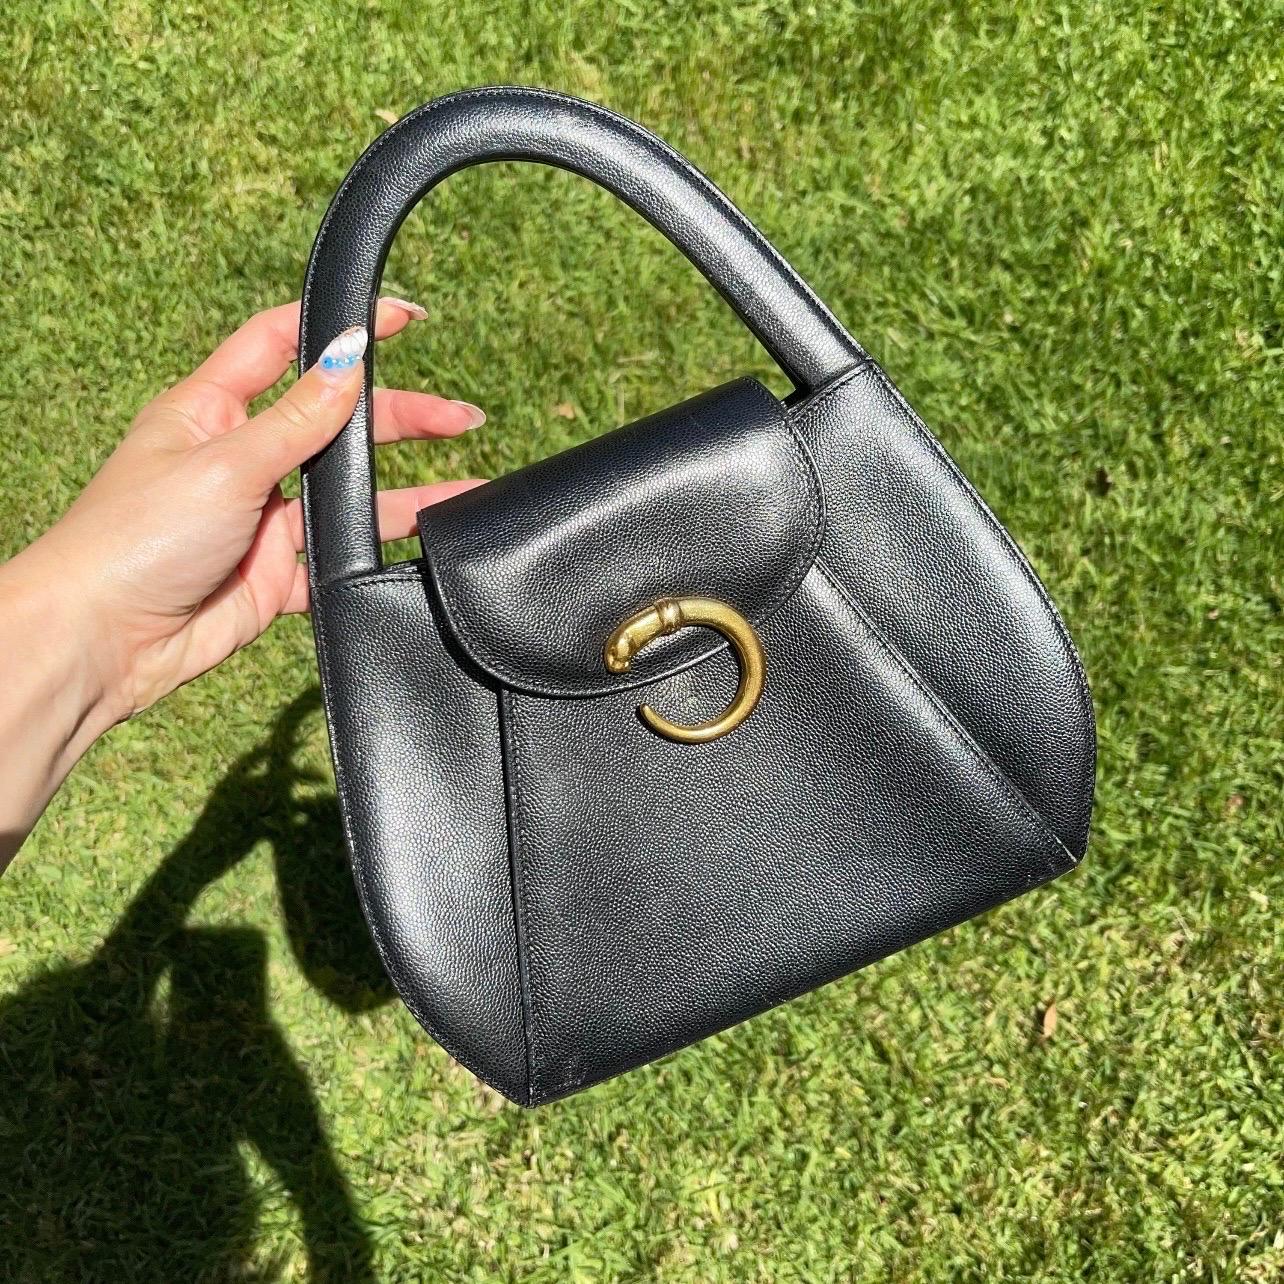 This stunning bag is such a rare treasure in immaculate condition!

Perfectly structured, with a chic silhouette and rounded handle. Featuring the signature Cartier panther in gold tone, two rounded top handles, fold over snap closure. Inside the